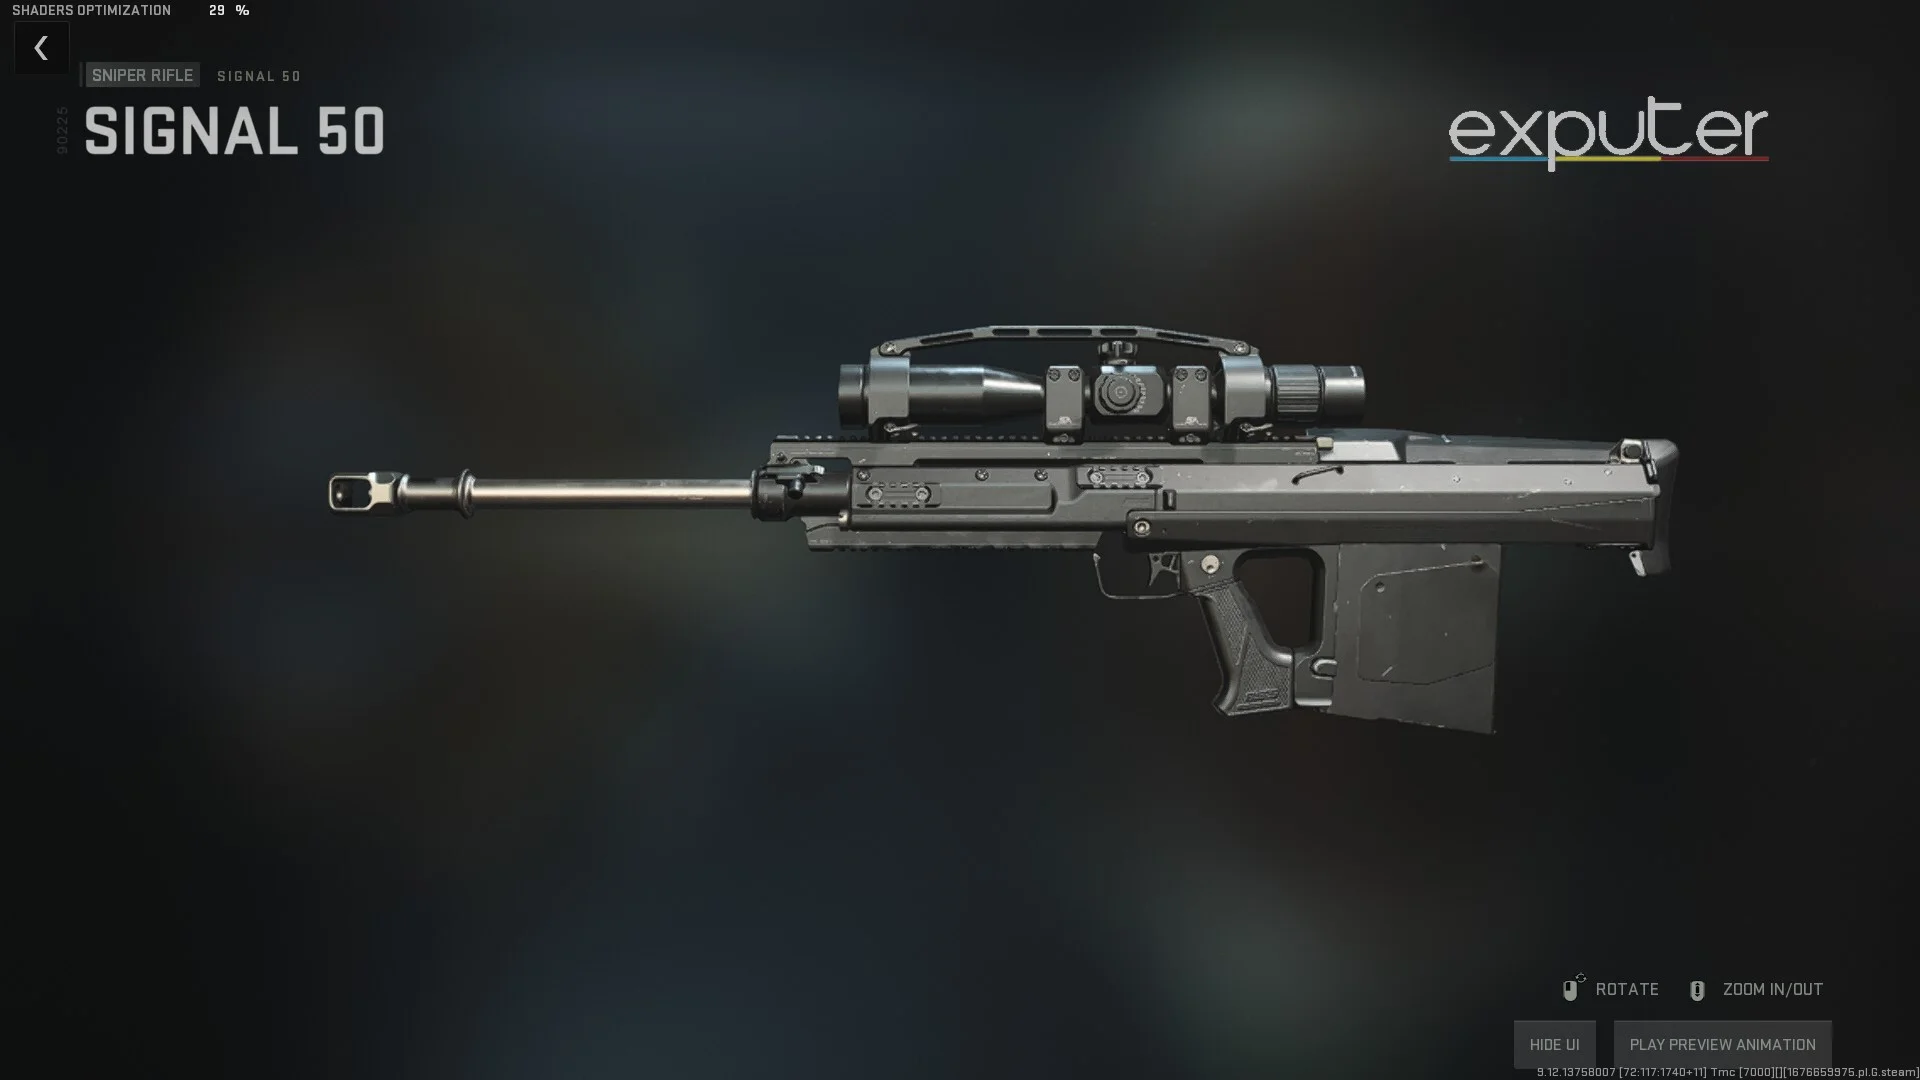 Call of Duty: Warzone Update Nerfs a Popular Sniper Rifle